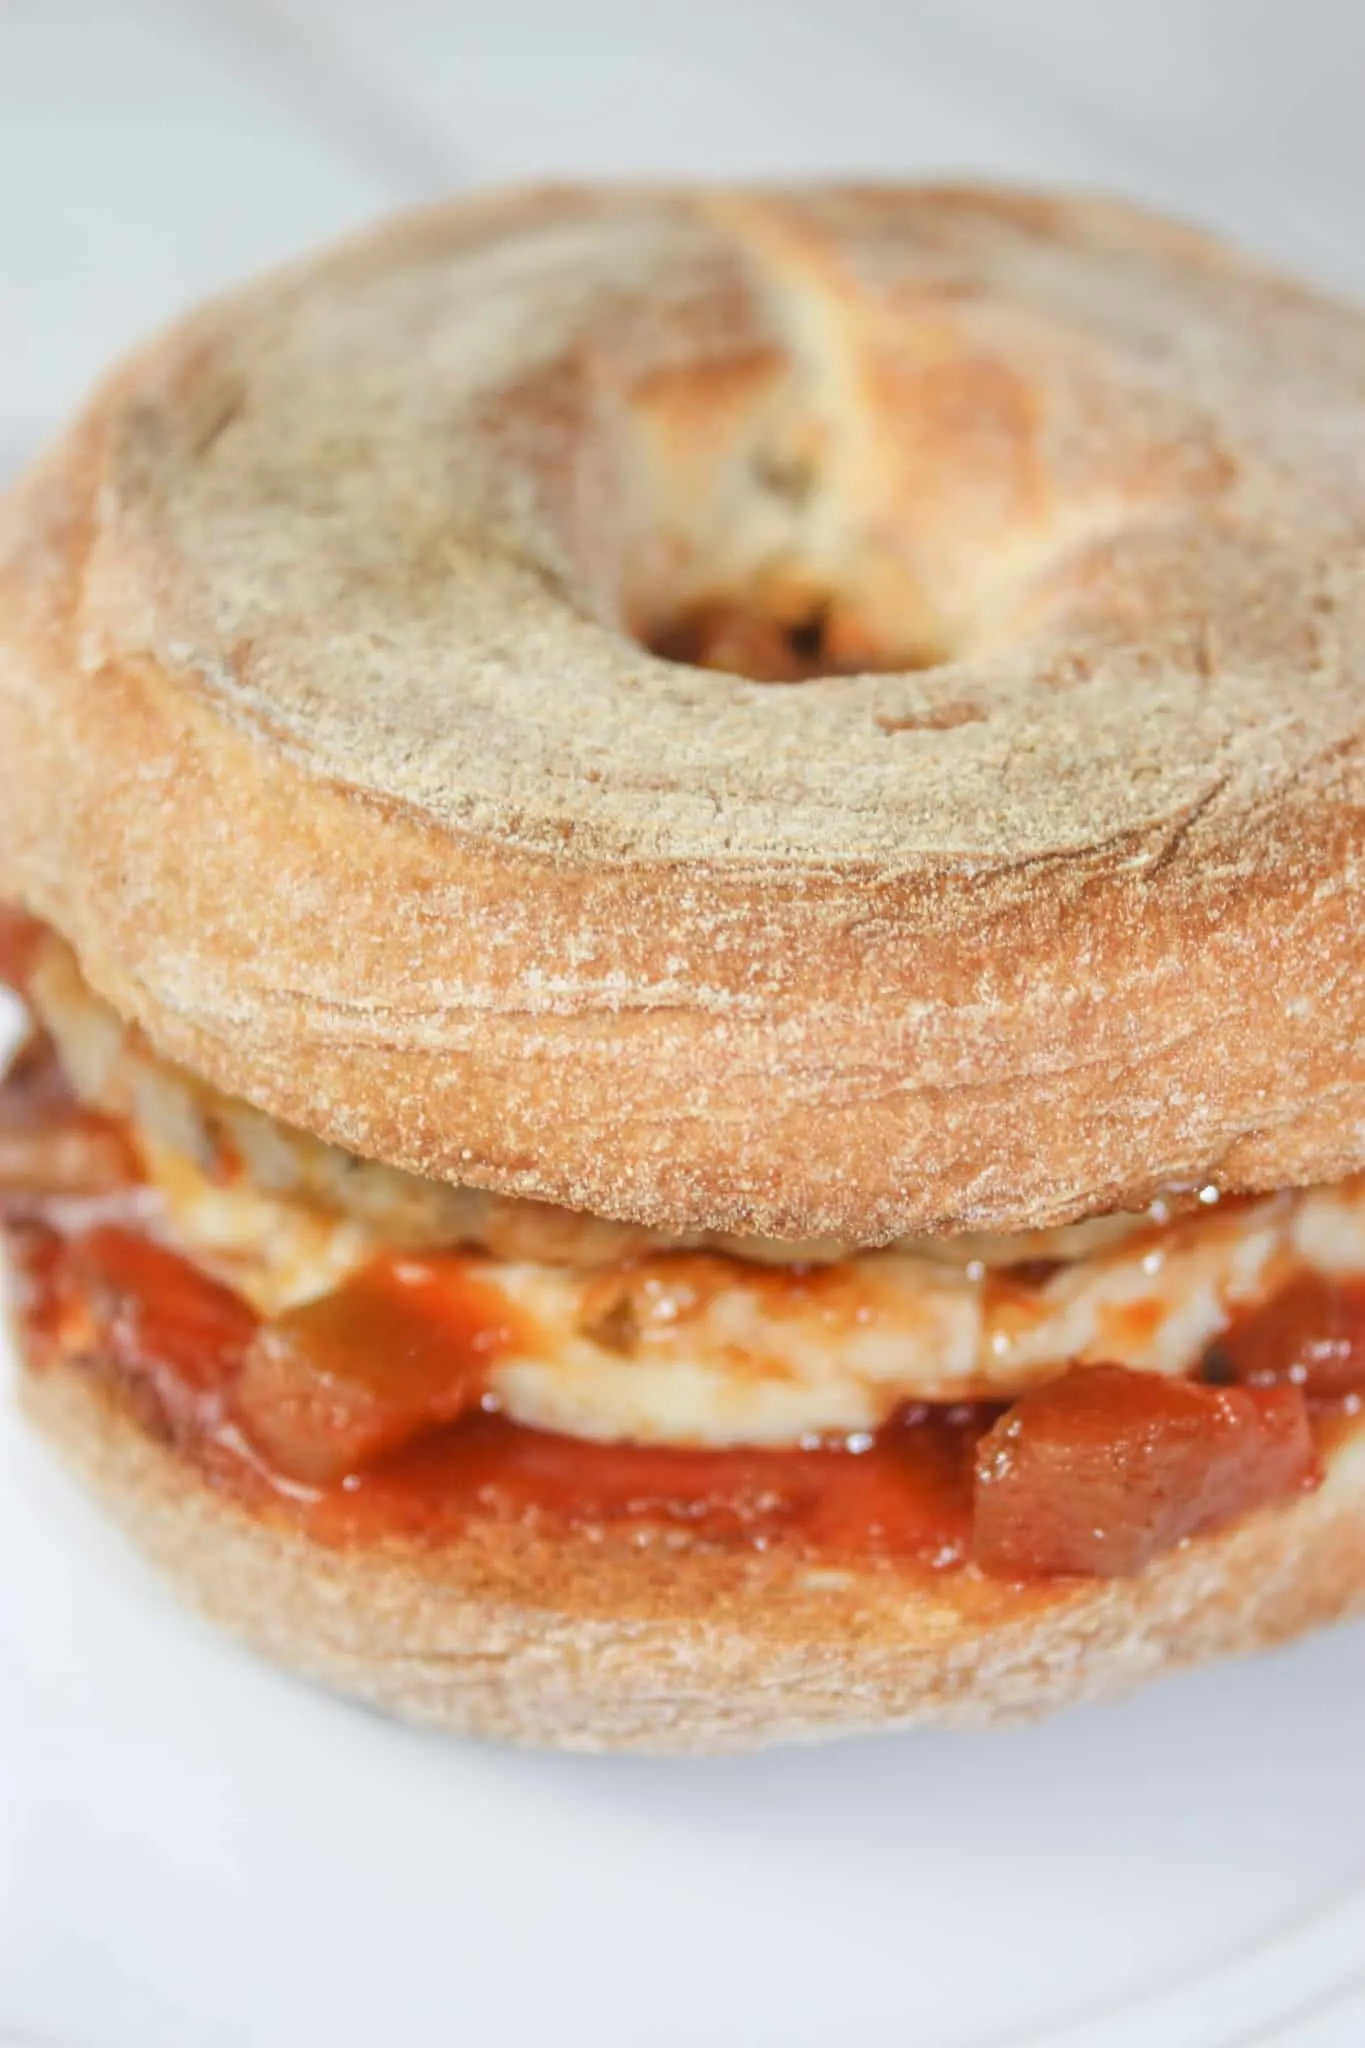 Gluten Free Breakfast Bagels are an easy, flavourful choice for a healthy start to your morning. Tasty egg and sausage smothered in a maple salsa sauce.